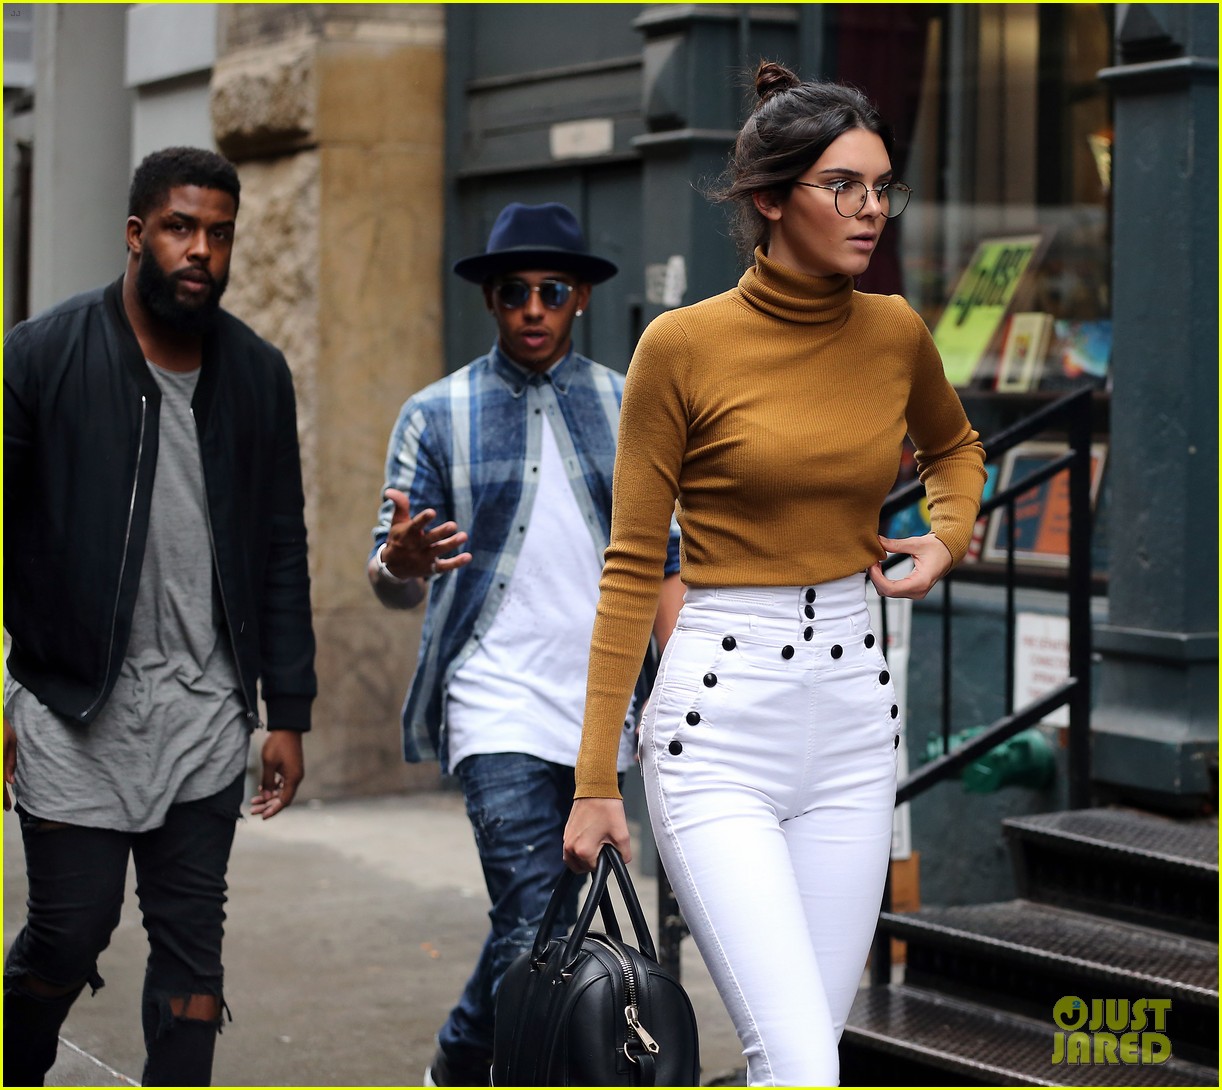 kendall jenner visits kimyes apartment with lewis hamilton 04